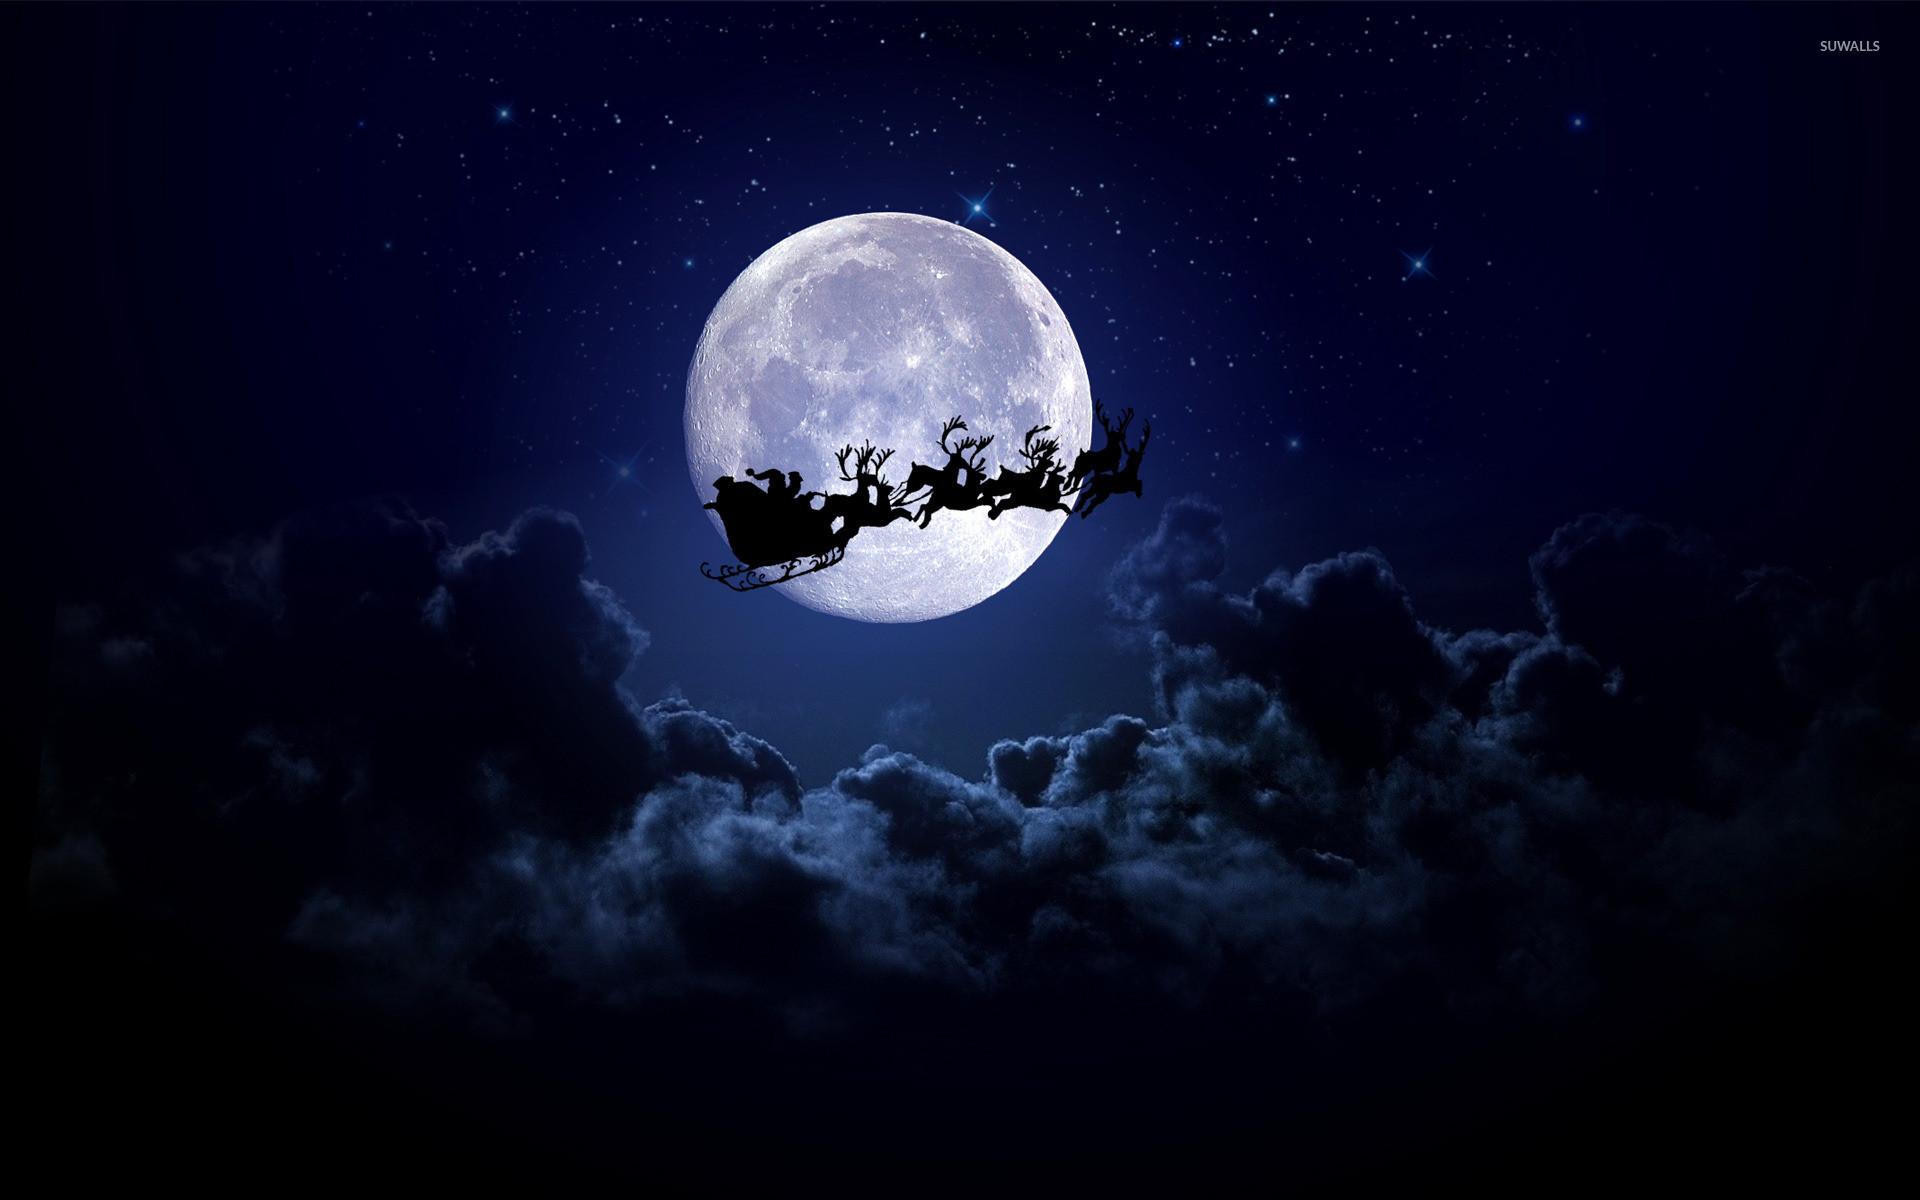 Christmas Eve Night Wallpapers Wallpaper Cave